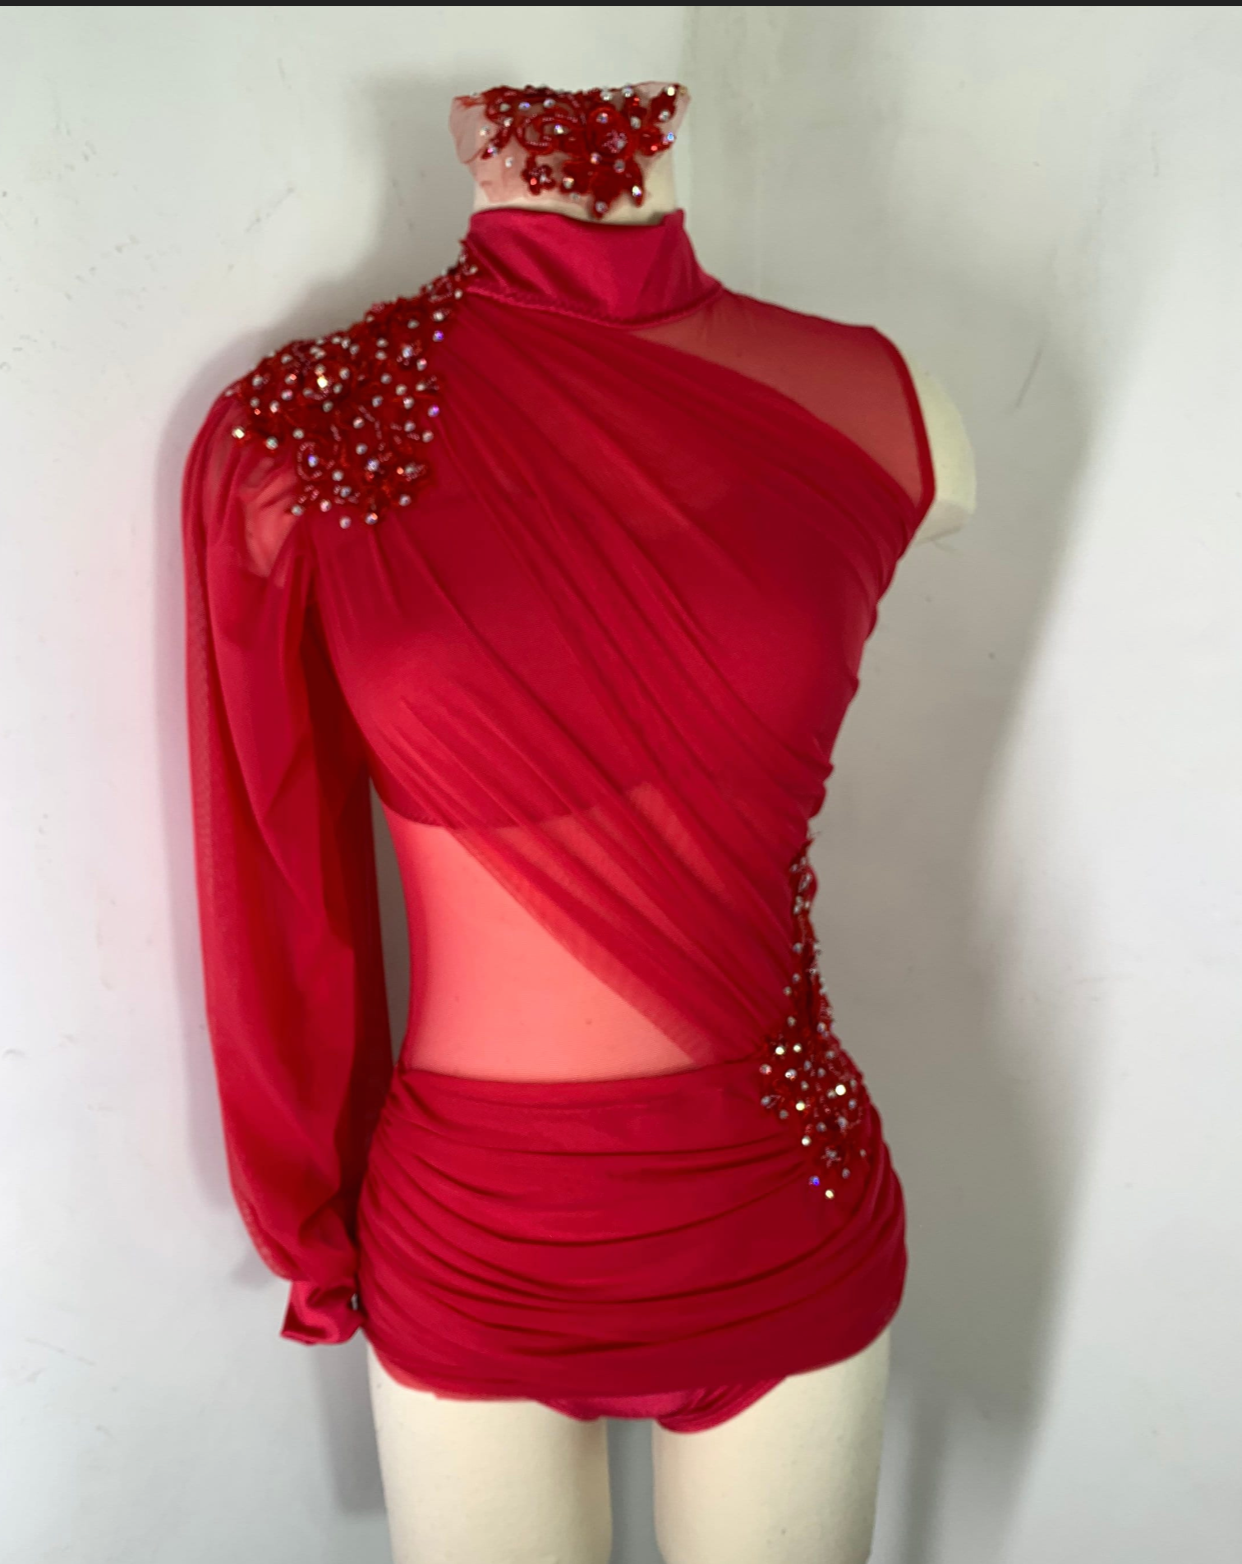 red contemporary dance costumes